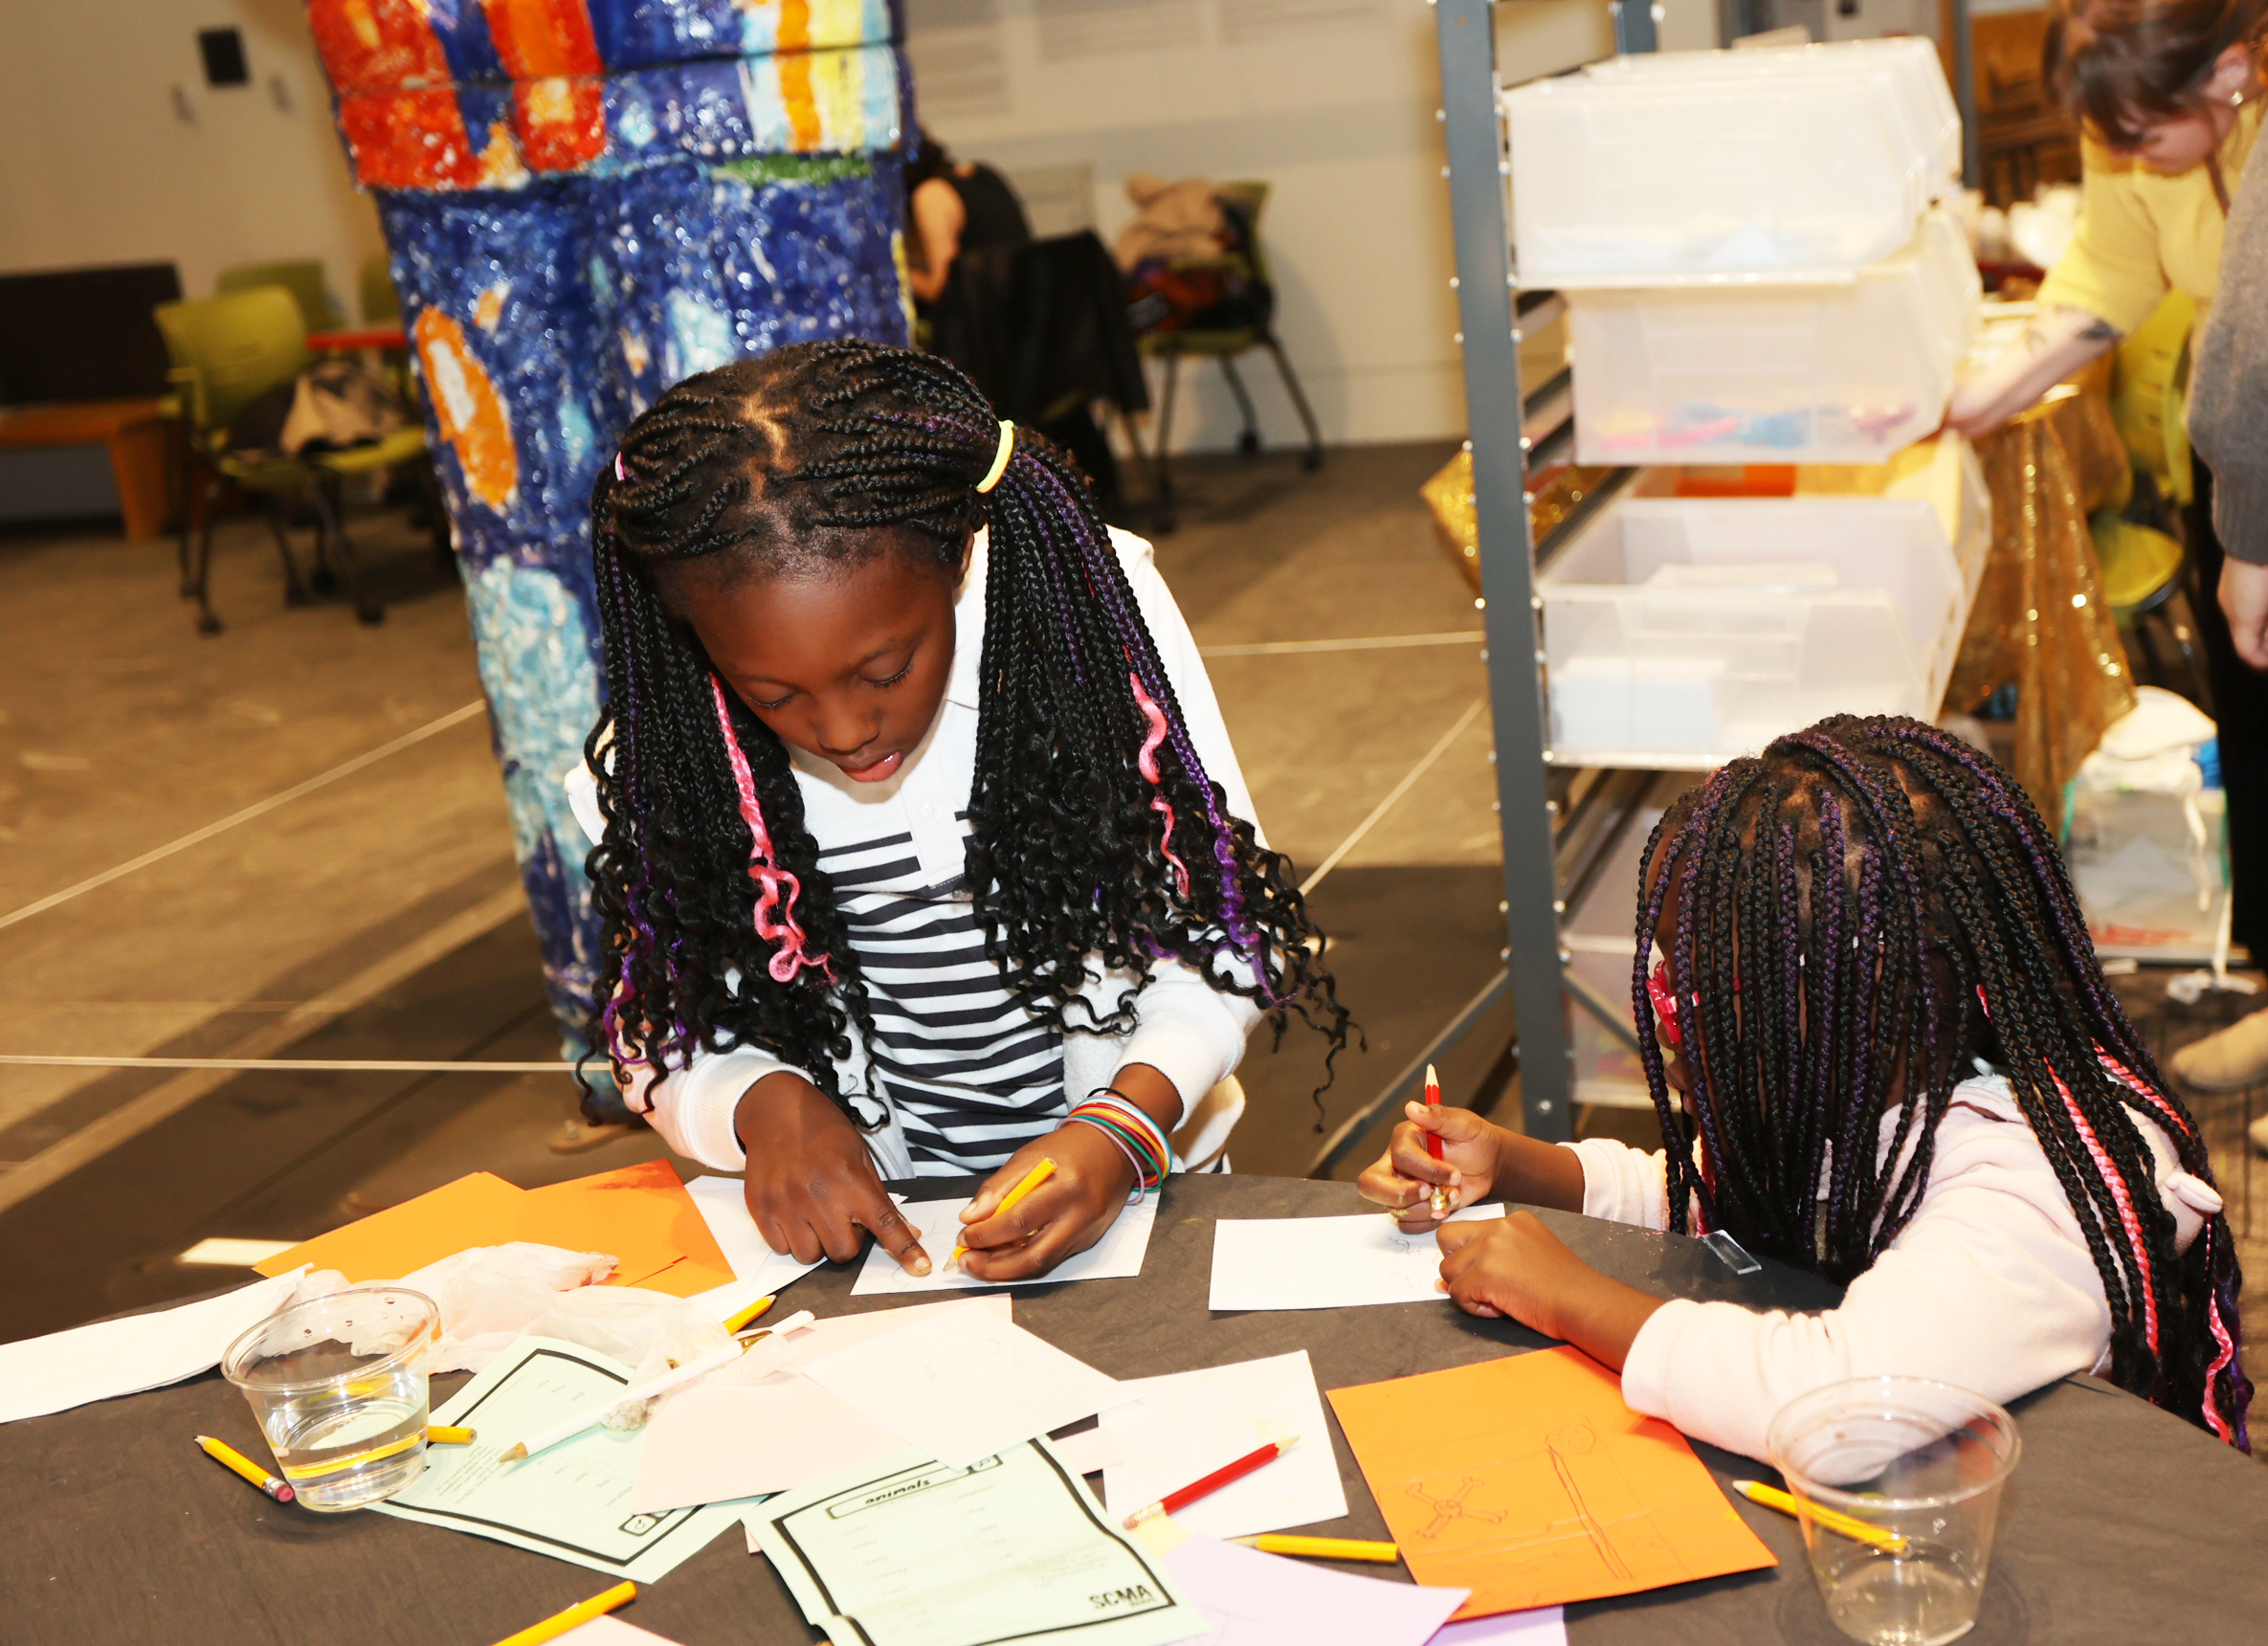 Two young dark skinned girls with braids working at a table drawing together.